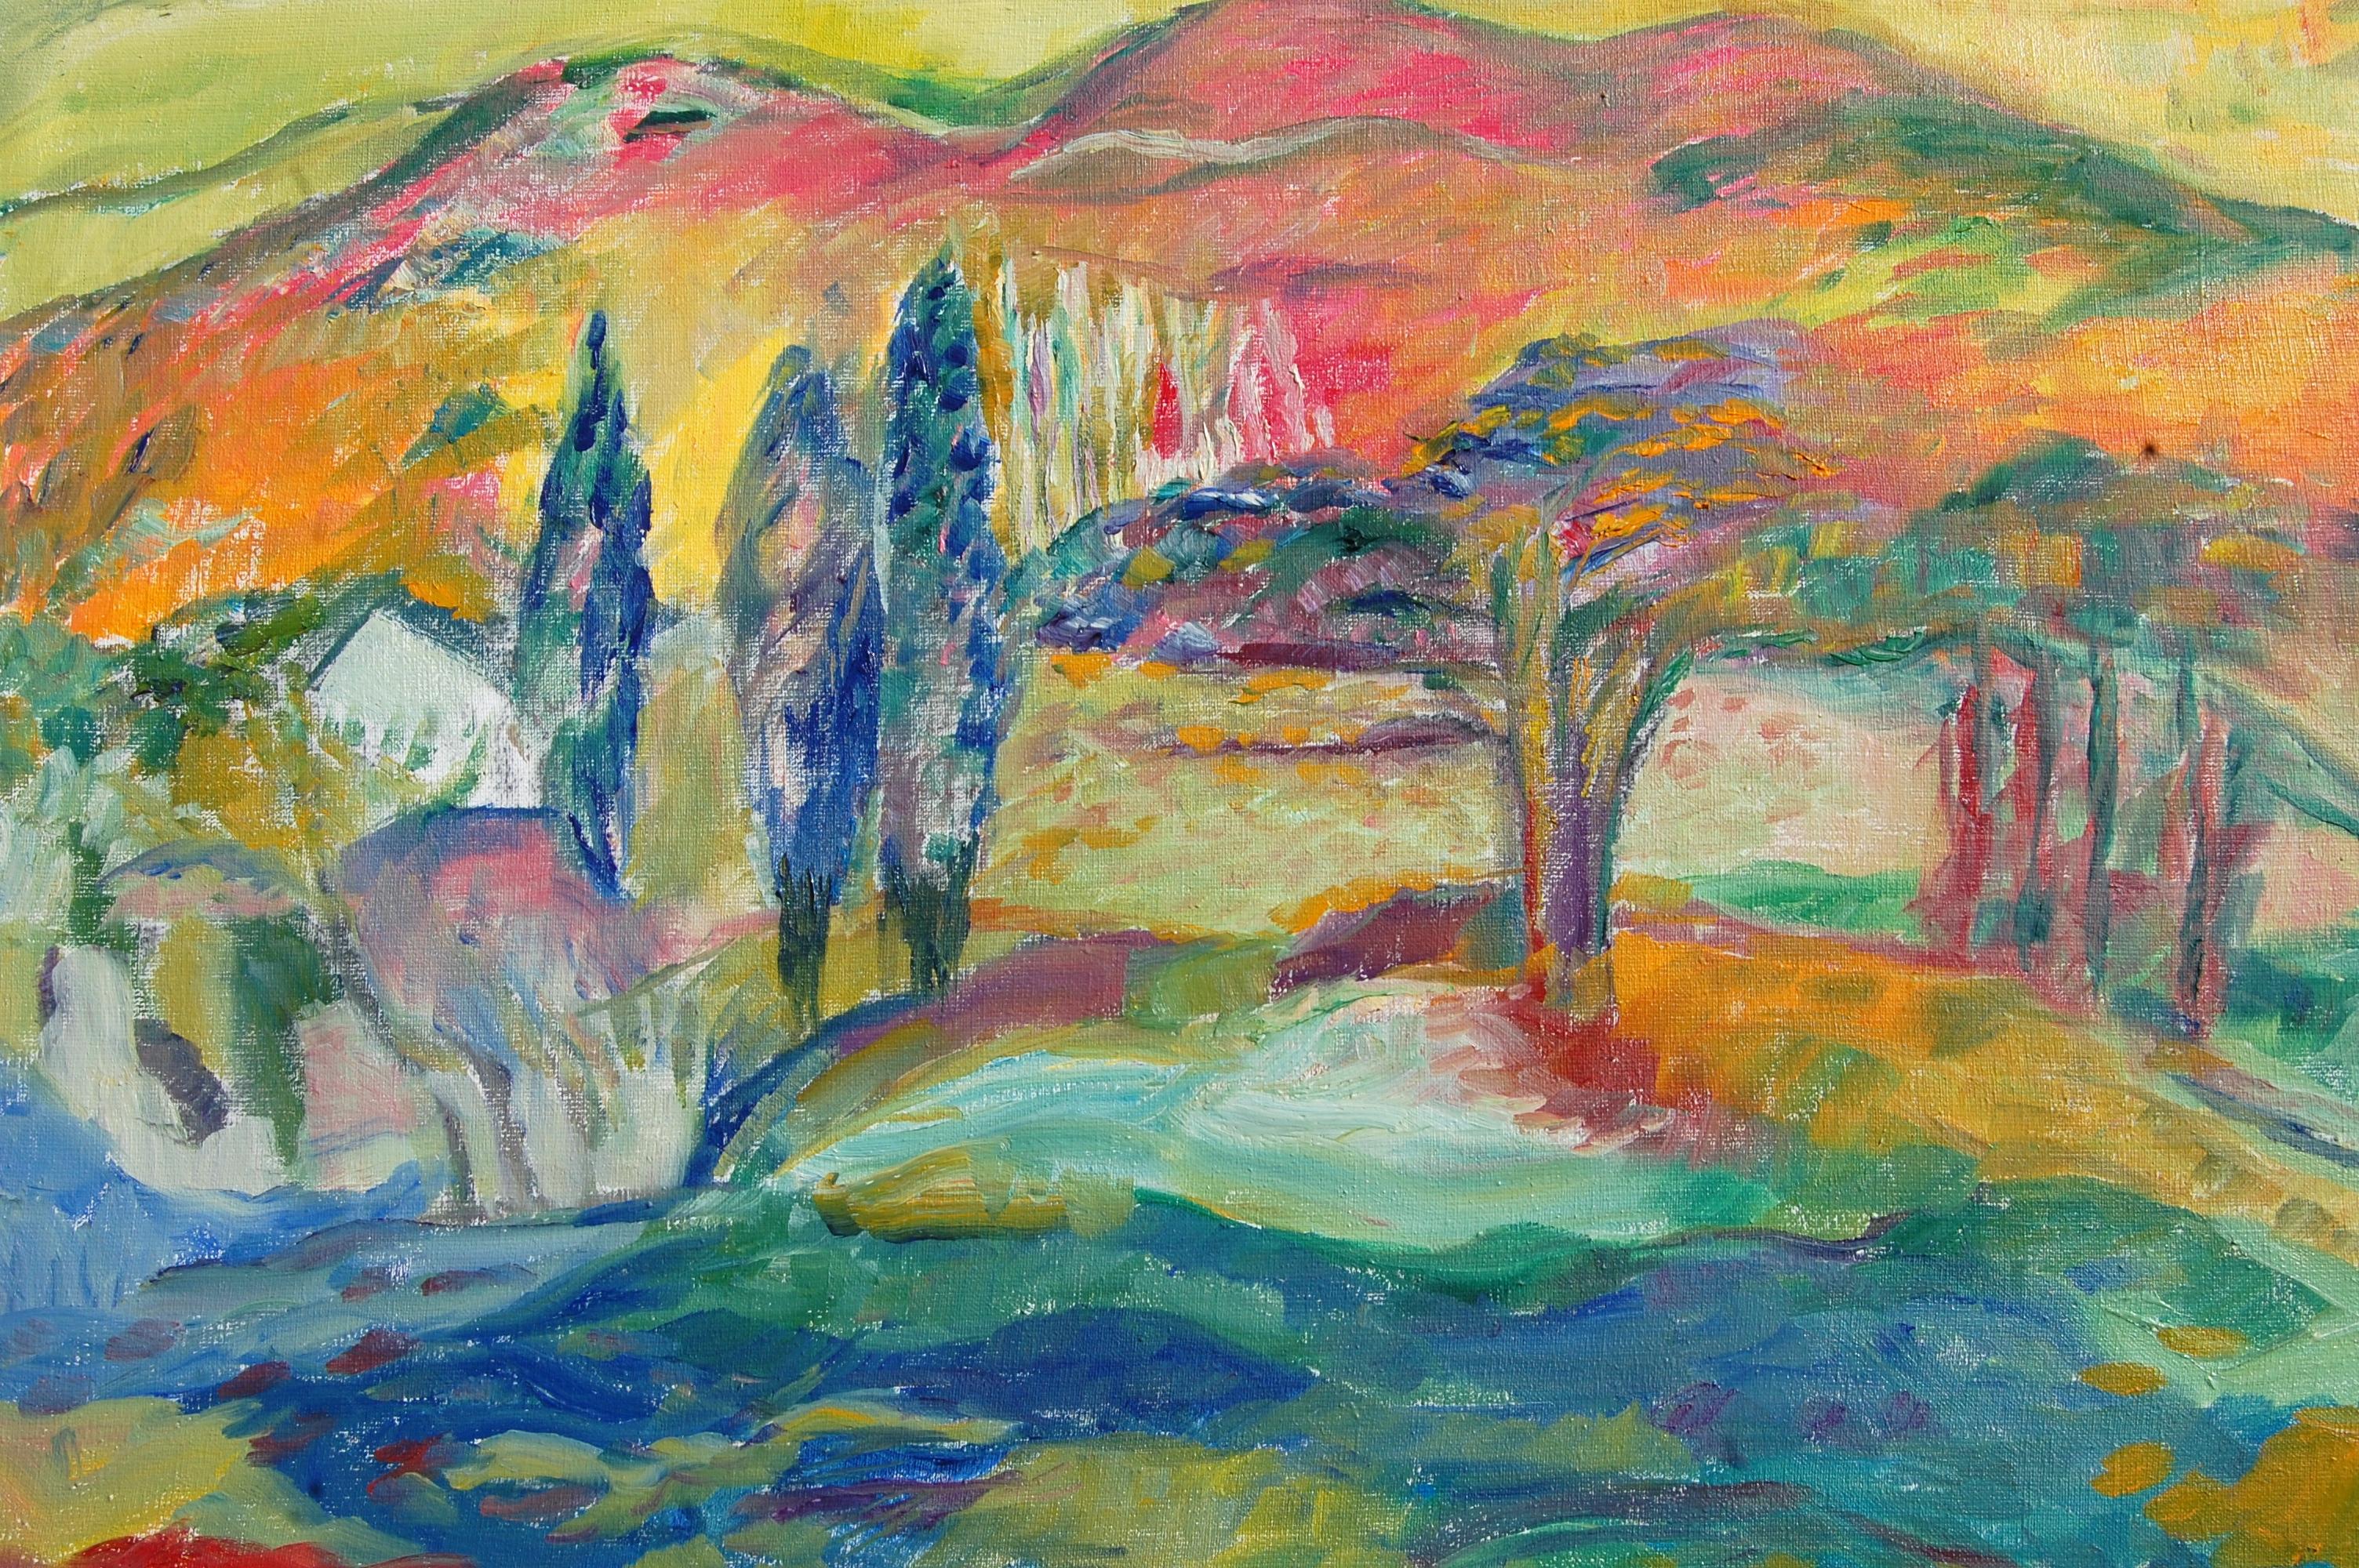 Vibrant Landscape With Mountain View - Painting by Jehudith Sobel